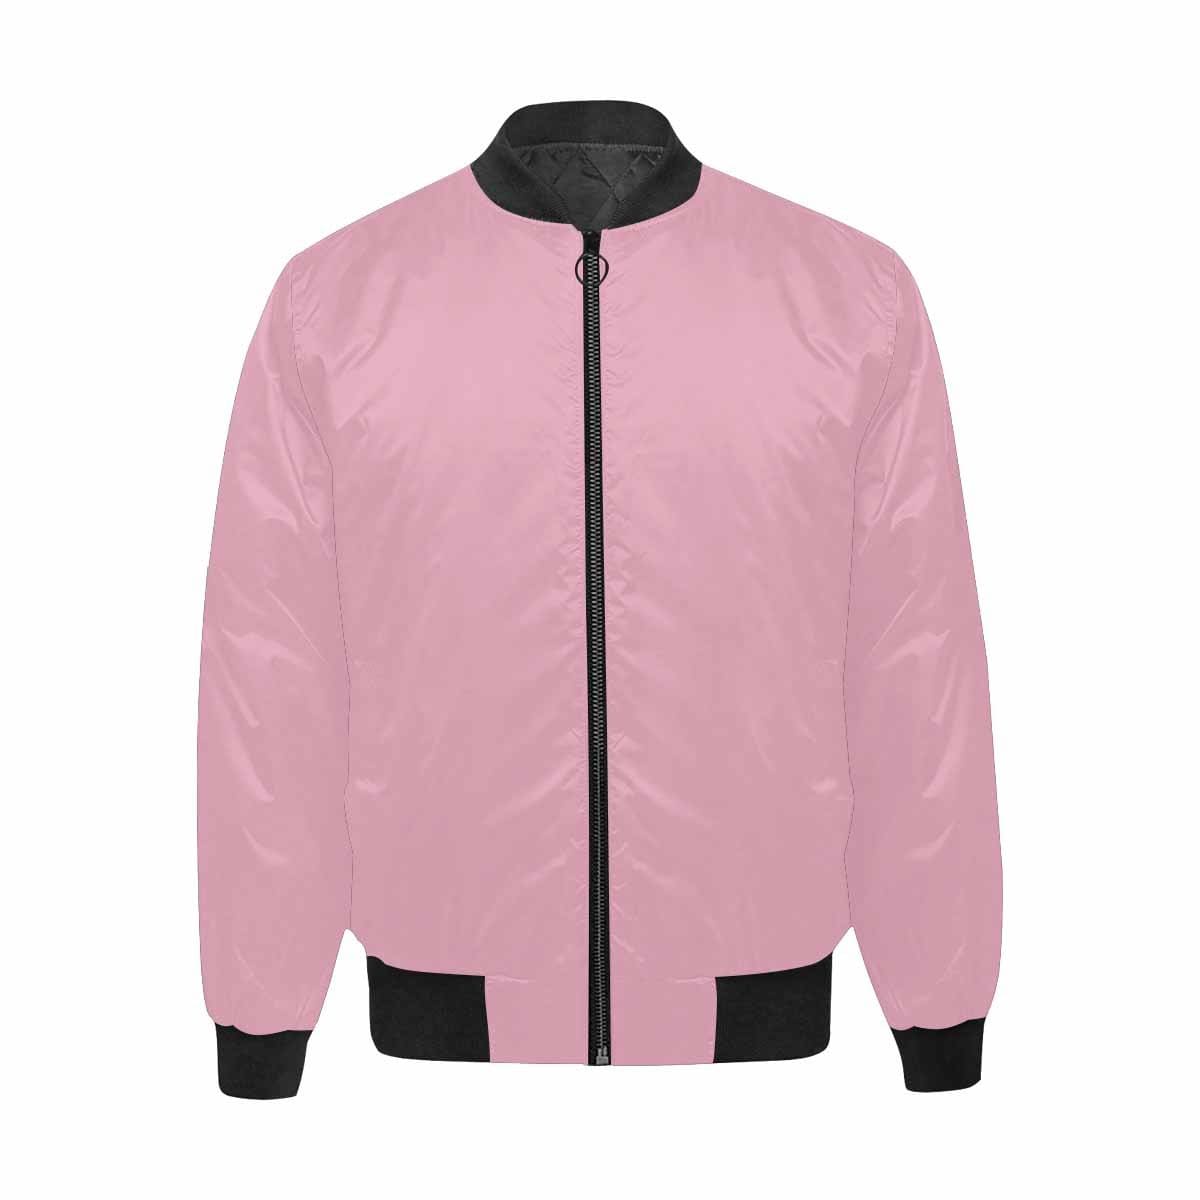 Mens Jacket Rosewater Red And Black Bomber Jacket - Mens | Jackets | Bombers